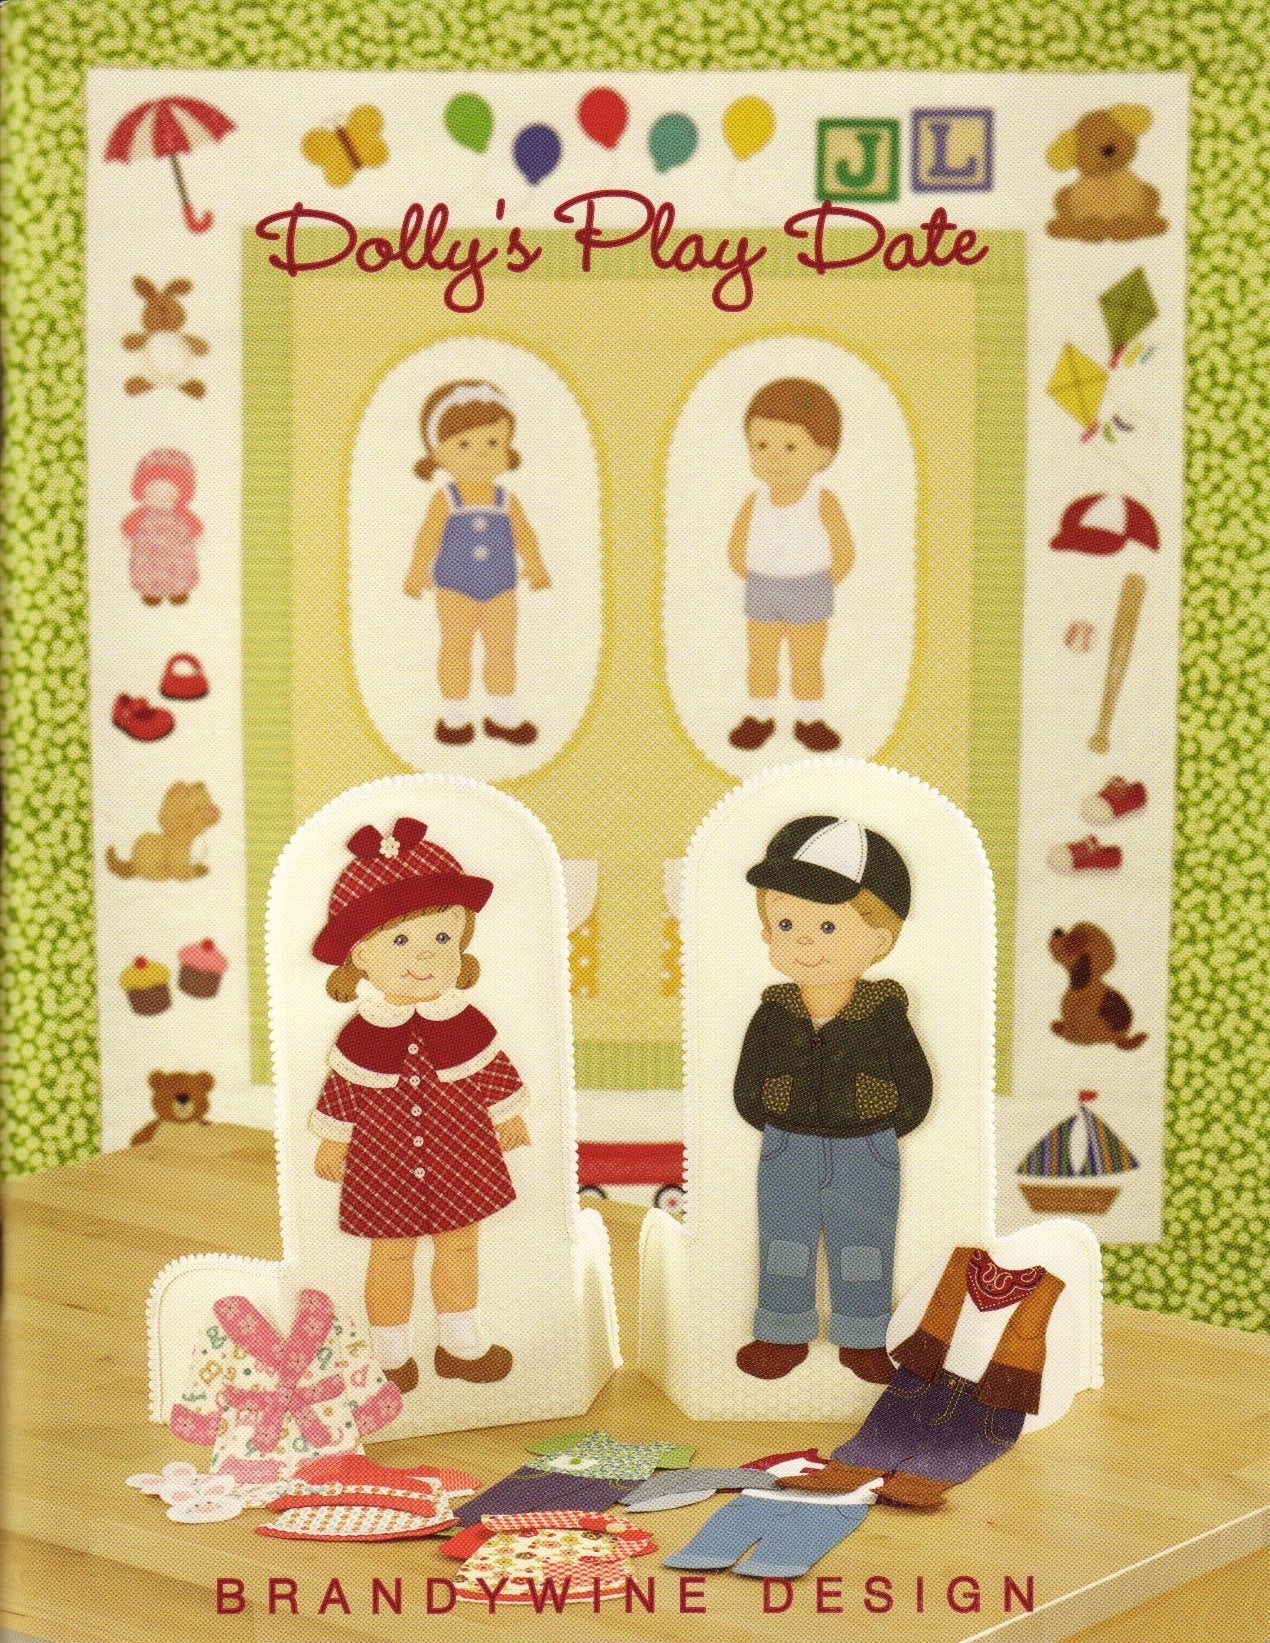 Dolly's Play Date